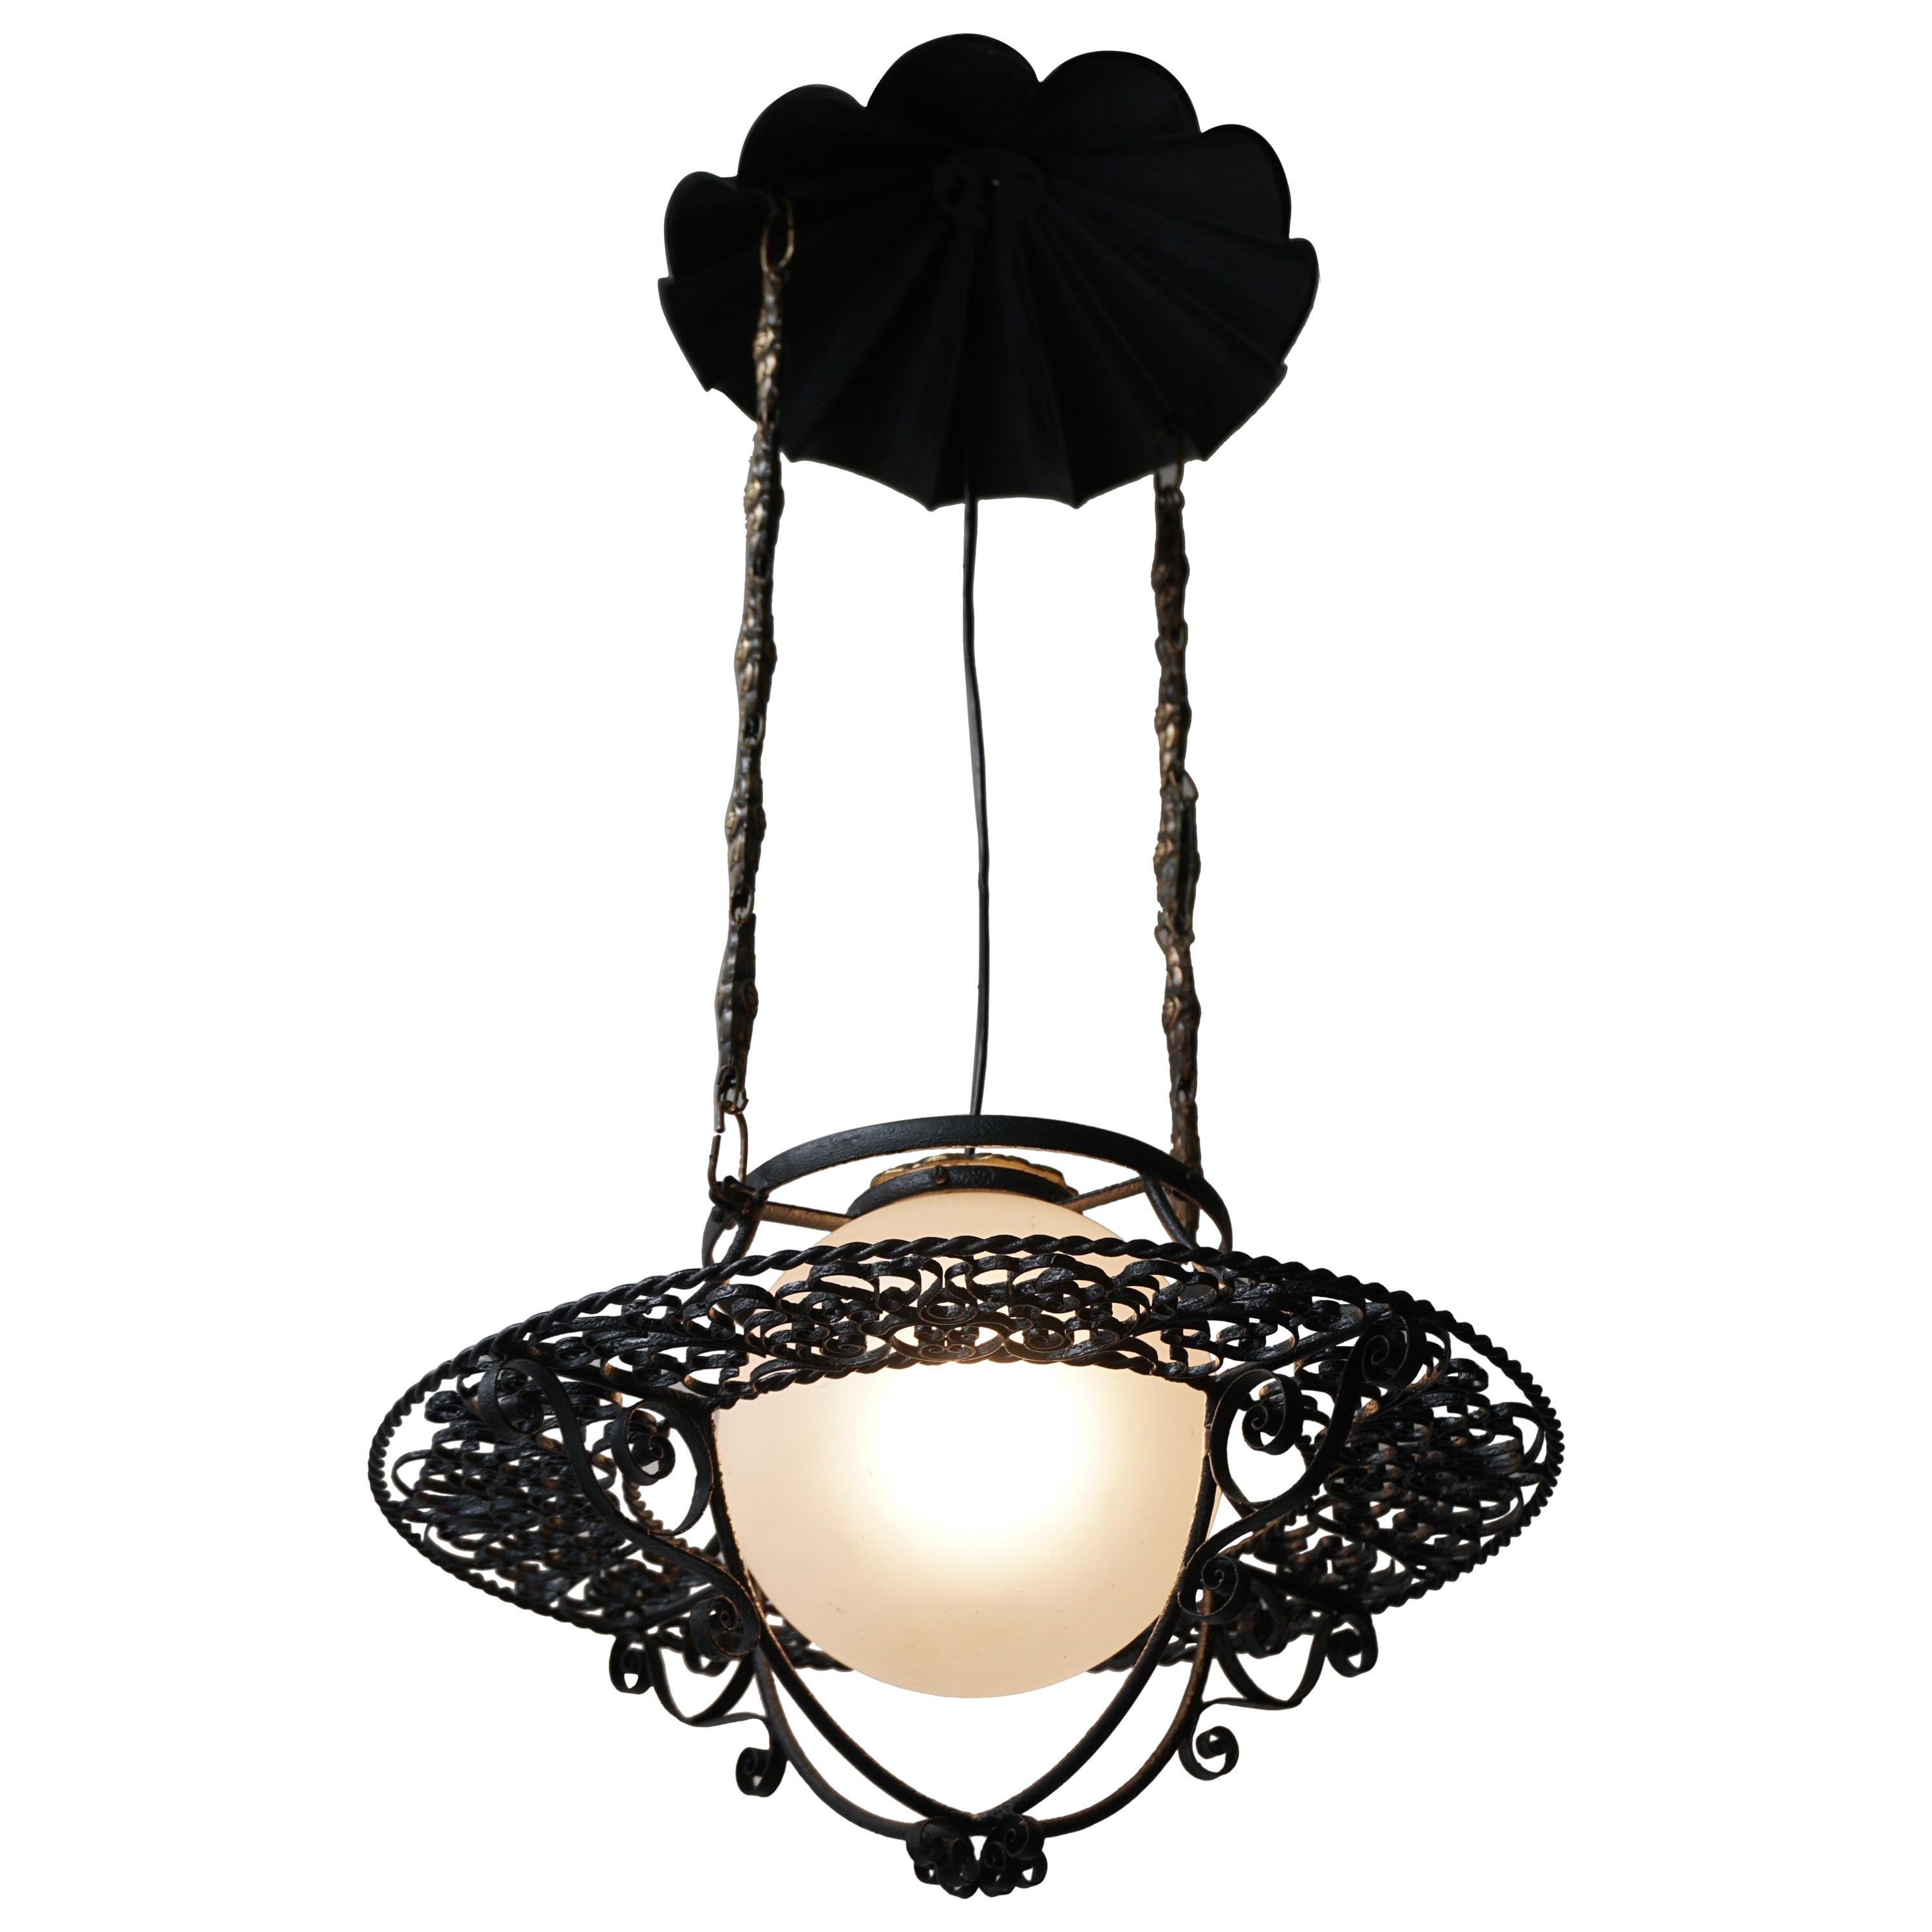 Italian Round Painted Iron Ceiling Light with One Centre Light